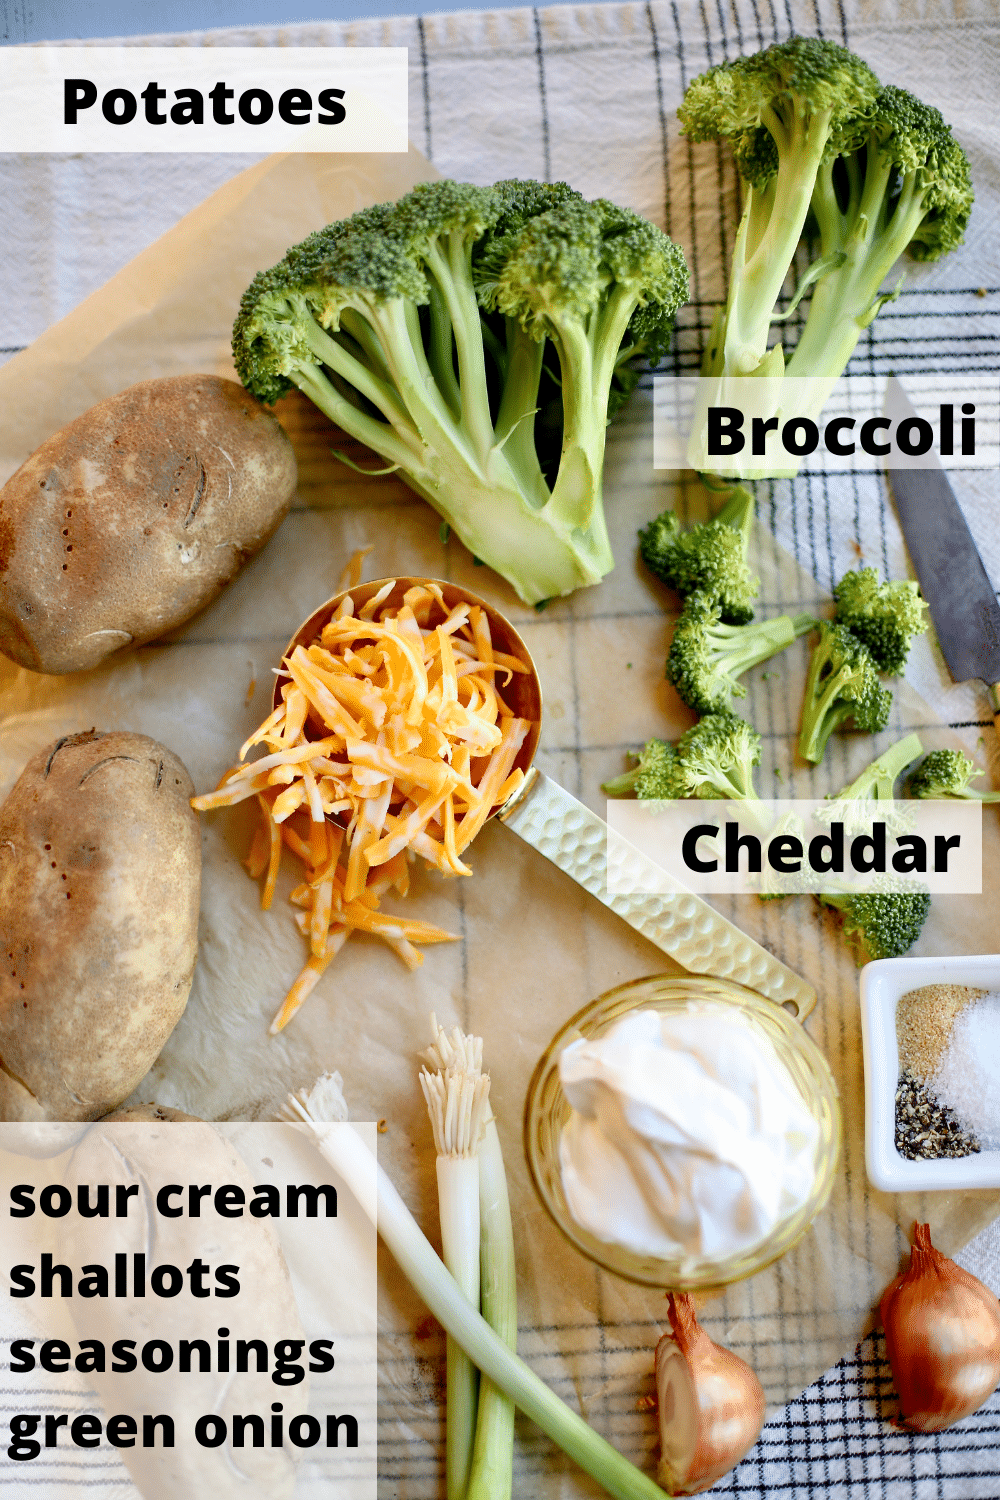 ingredients for twice baked potatoes with text sayign the names of each item.